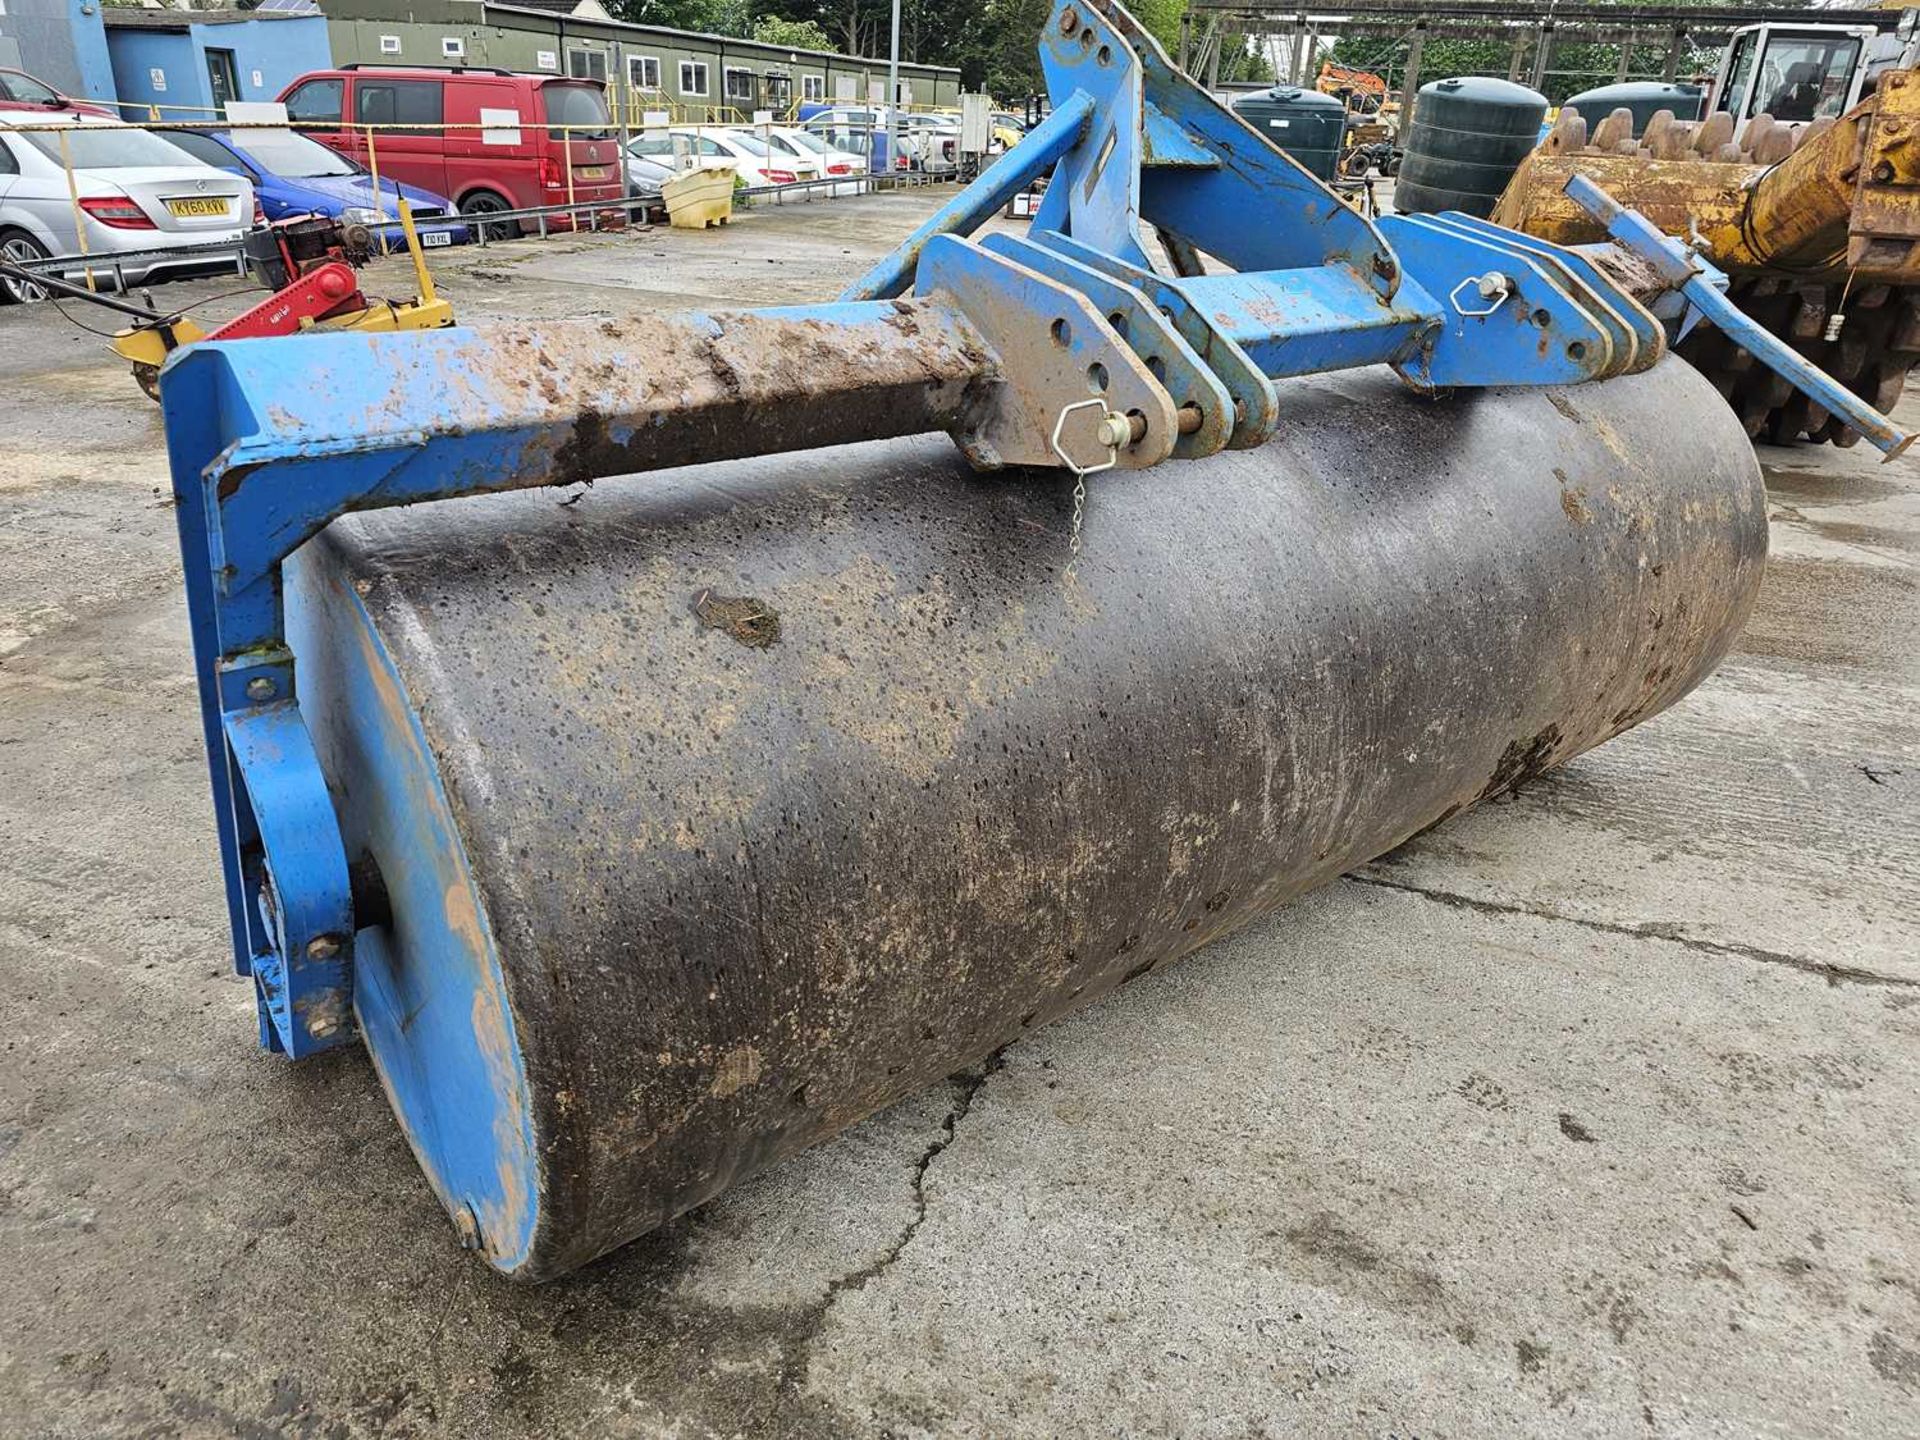 2016 Expom 1200Kg Roller to suit 3 Point Linkage - Image 4 of 9